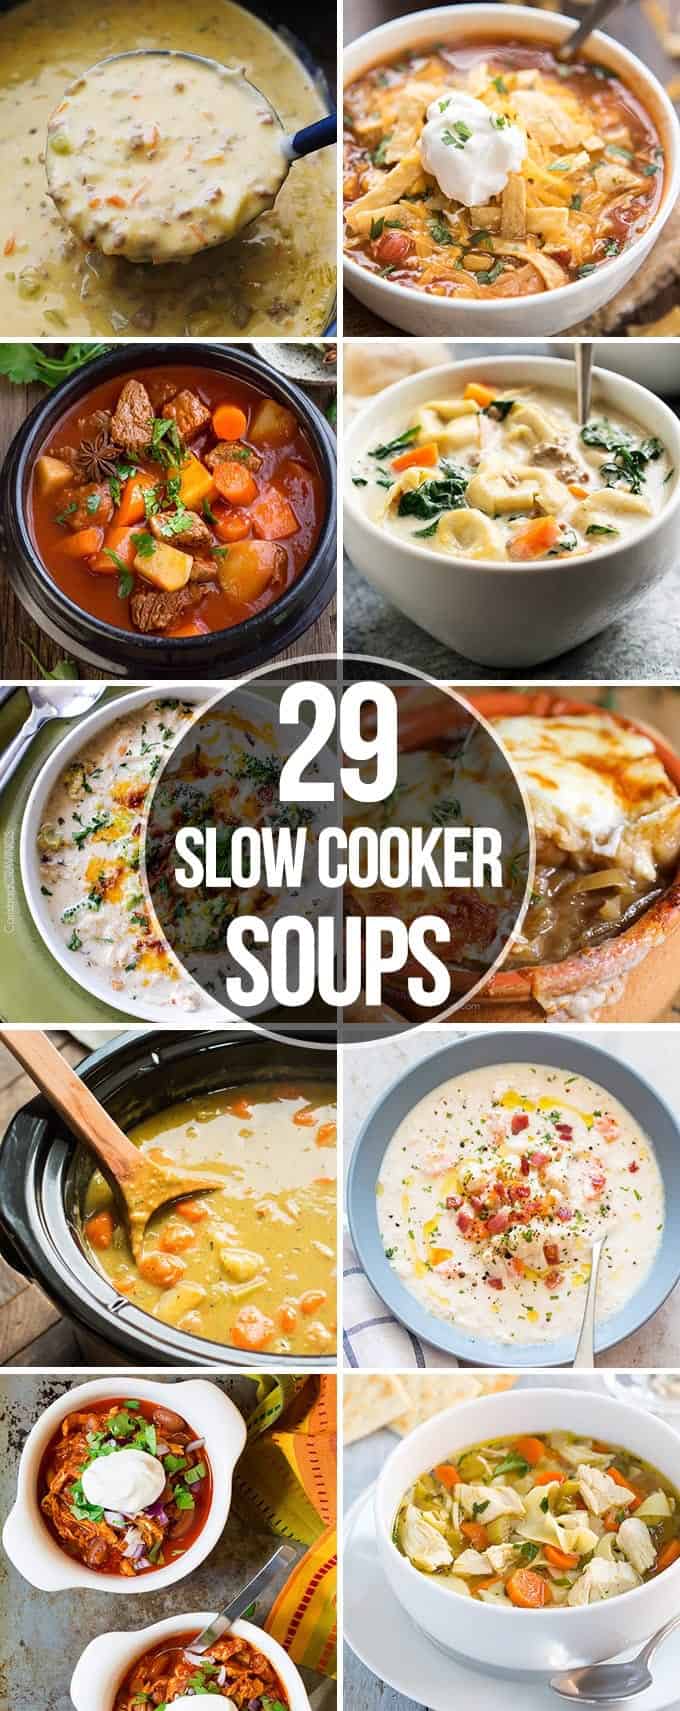 29 Slow Cooker Soups